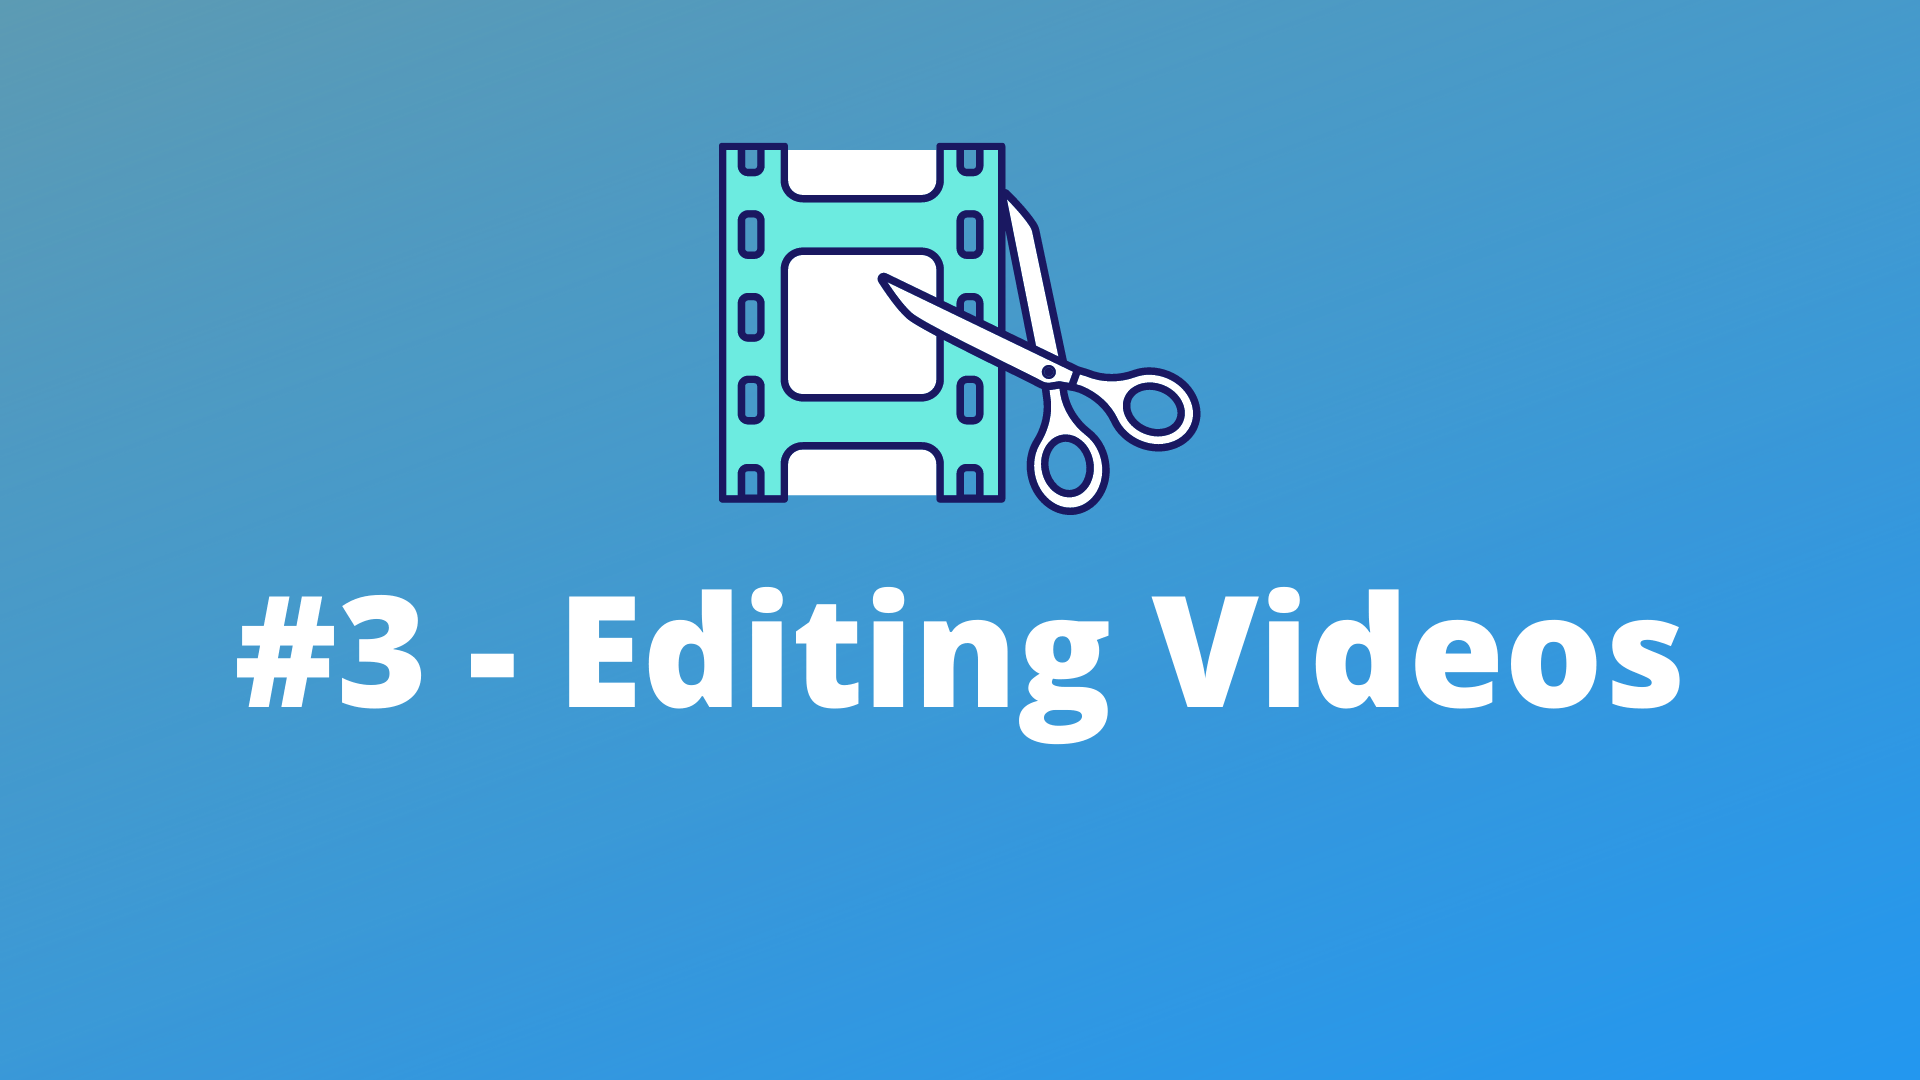 How to side hustle from home editing videos